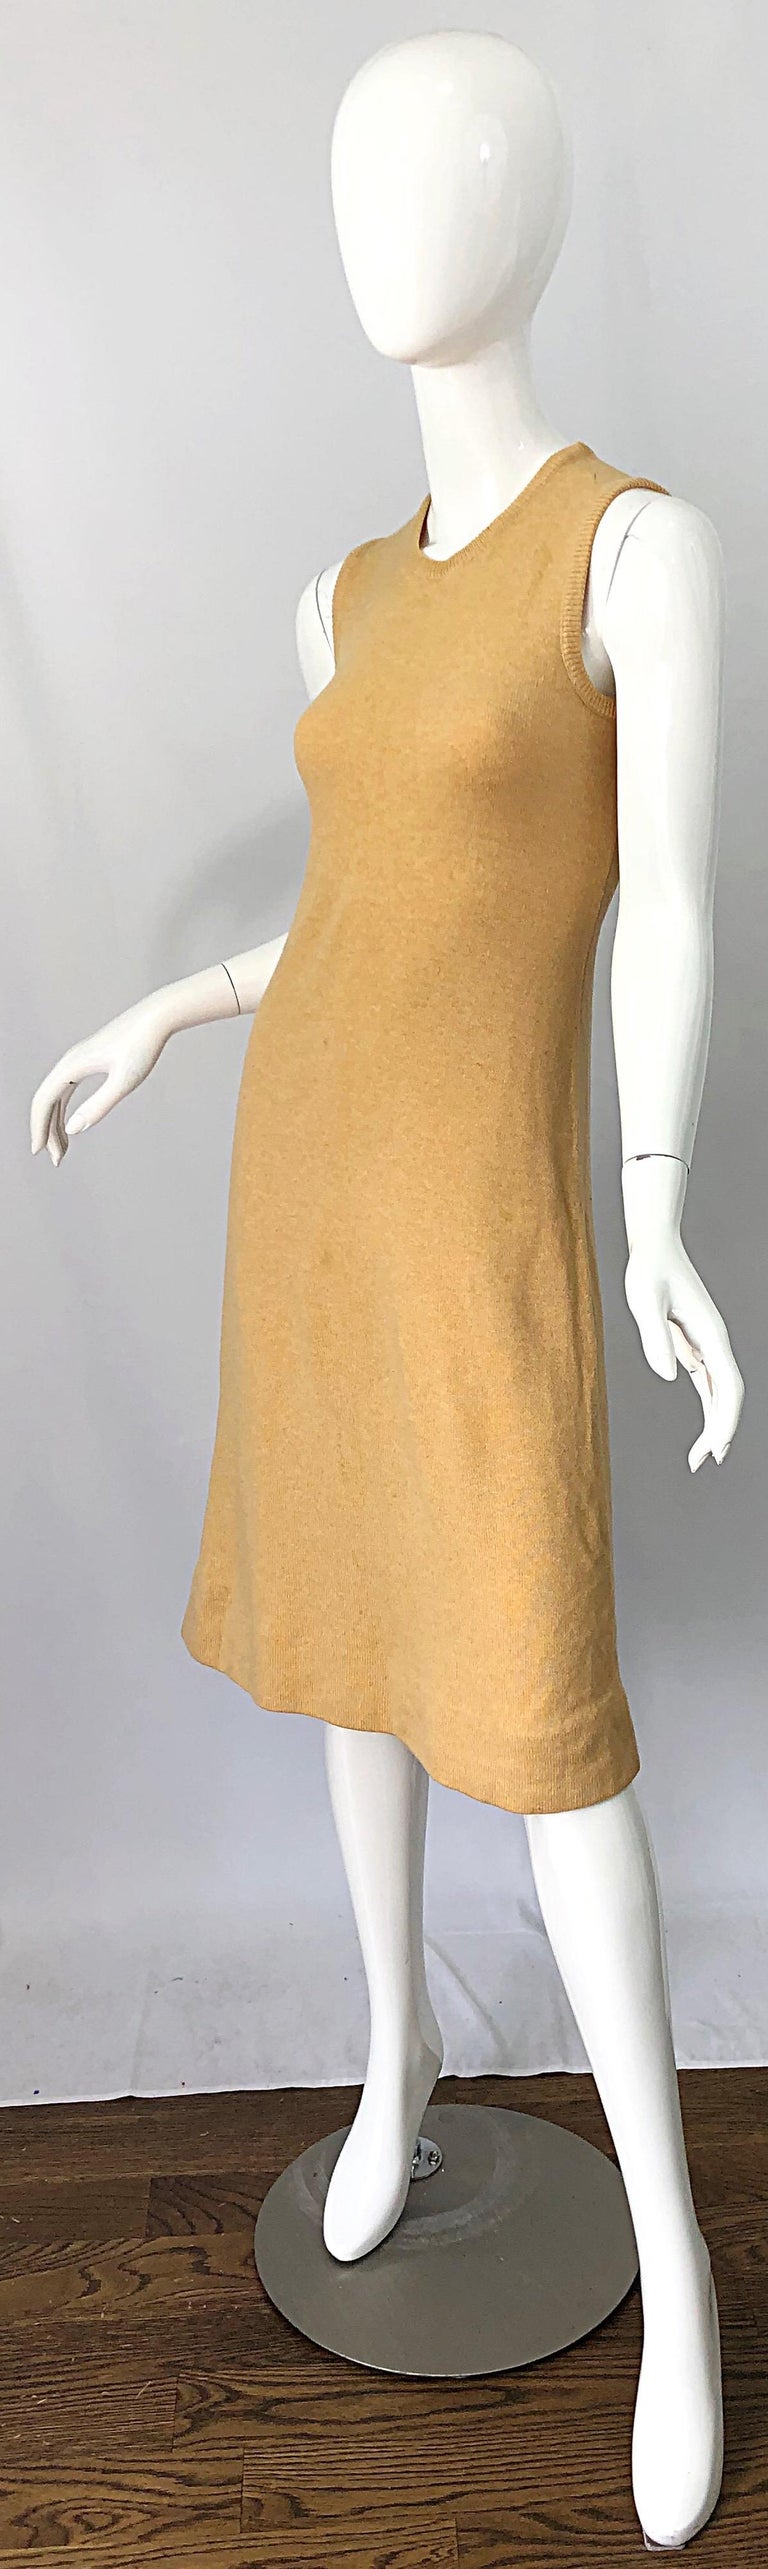 1970s HALSTON Cashmere Camel Tan 70s Vintage Dress and Cardigan Sweater Jacket For Sale 4